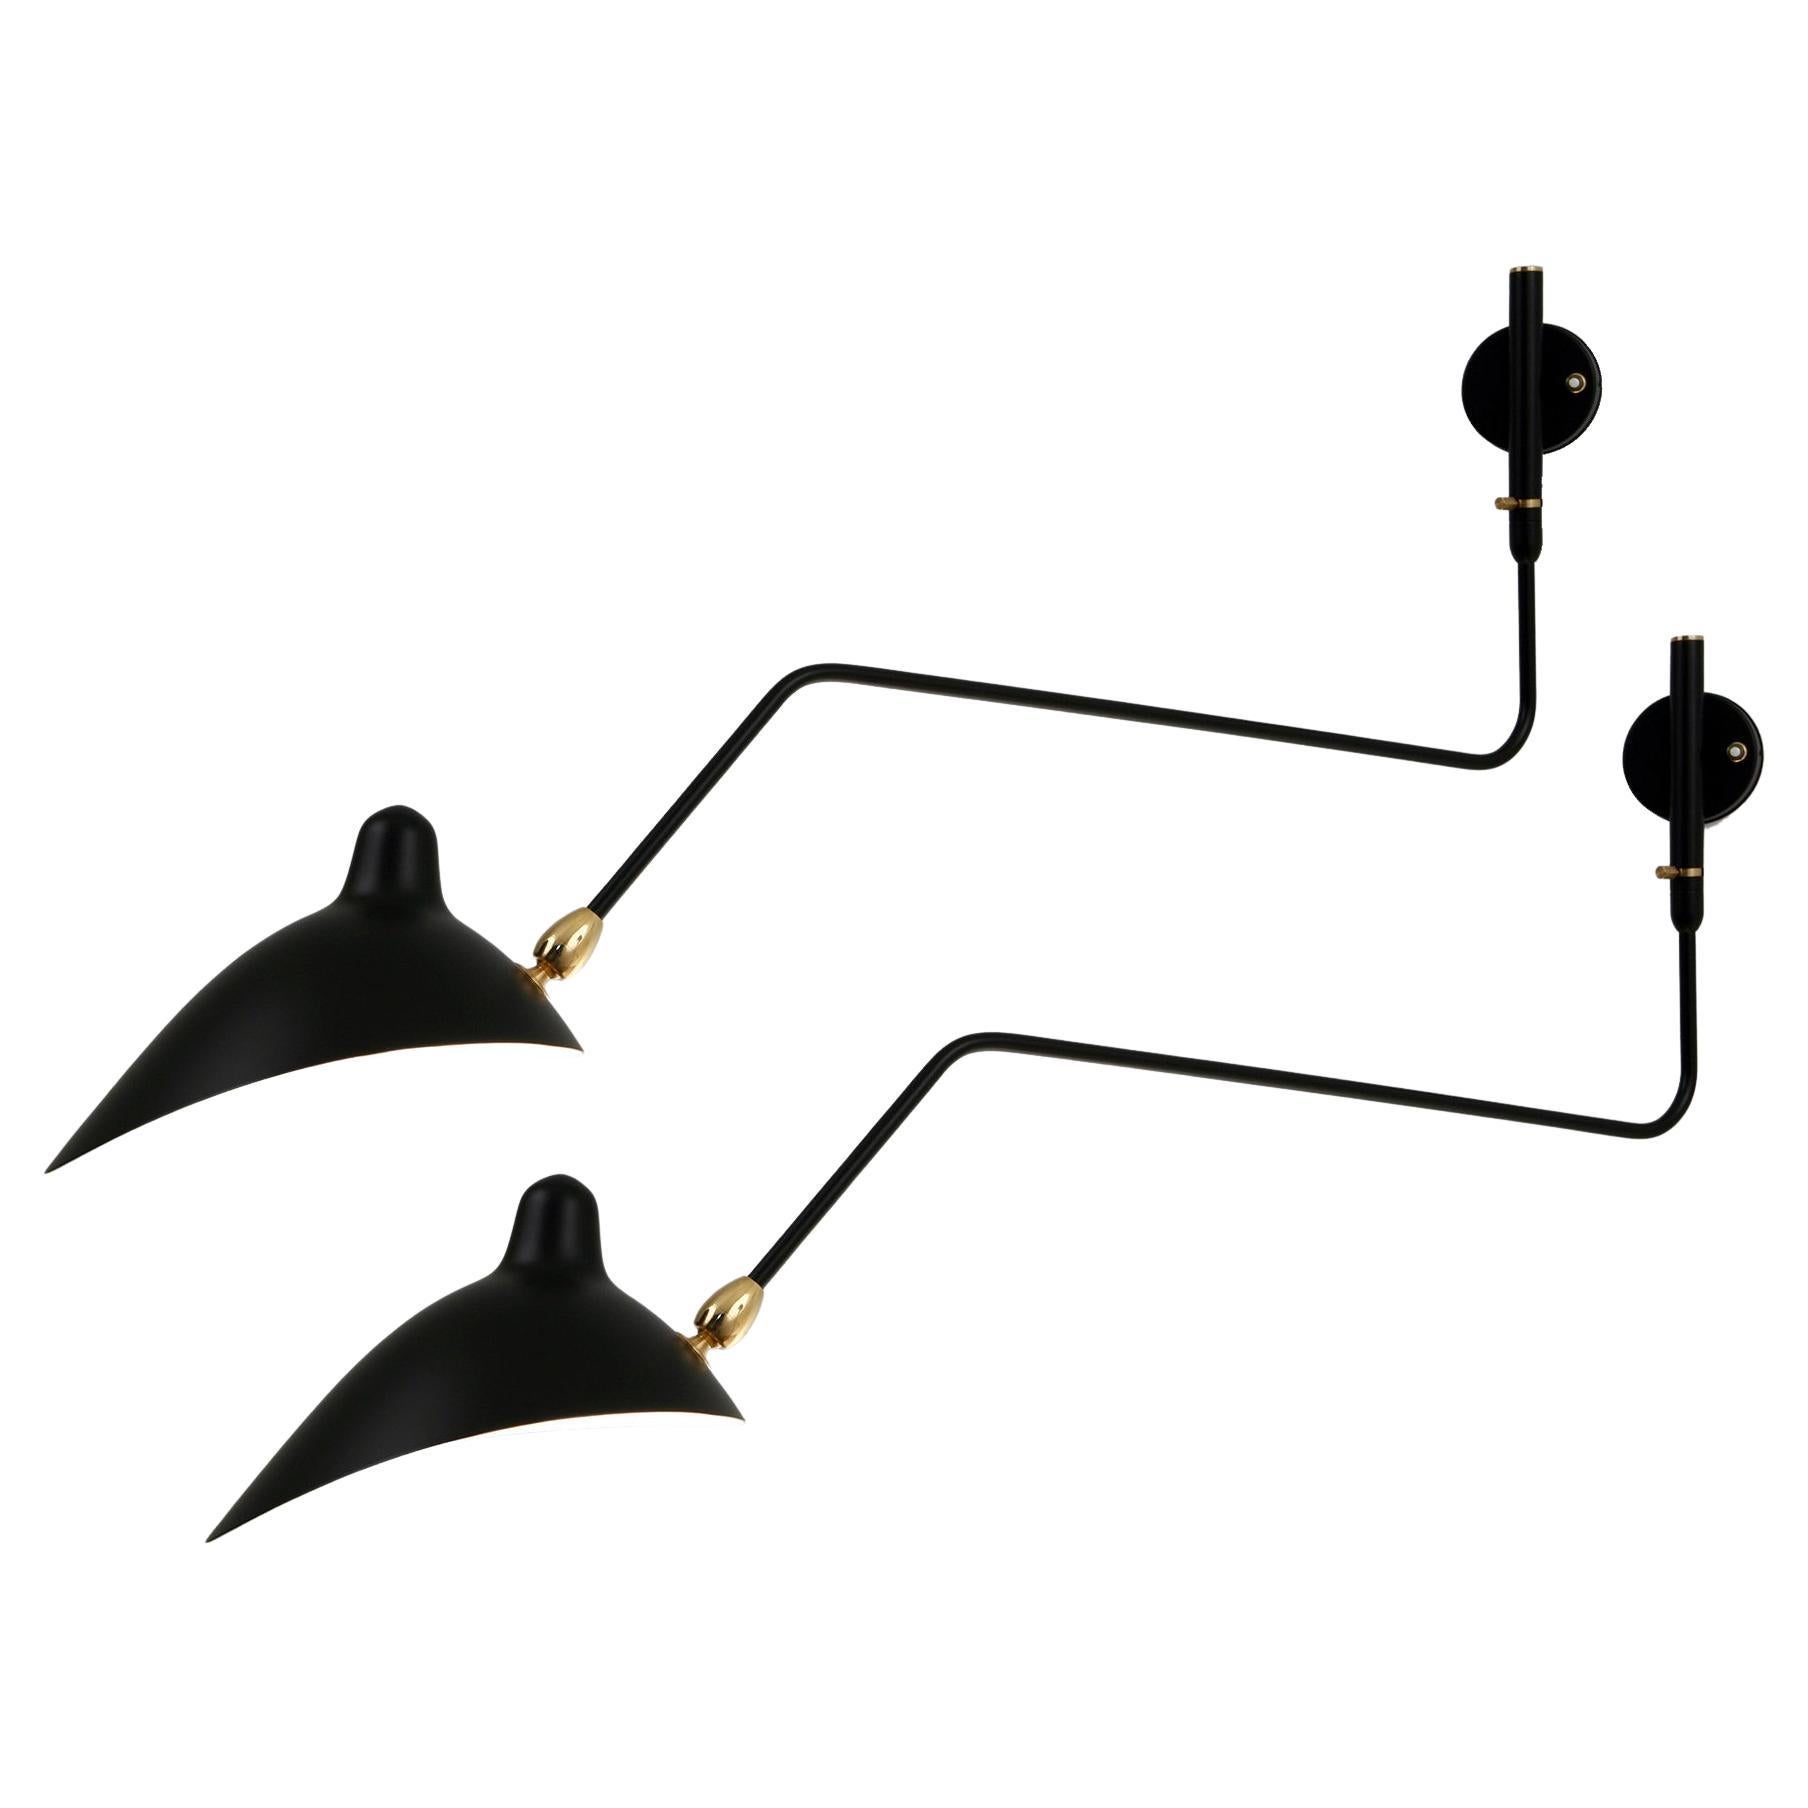 Serge Mouille - Pair of Rotating Sconces with 1 Curved Arm in Black - IN STOCK! For Sale